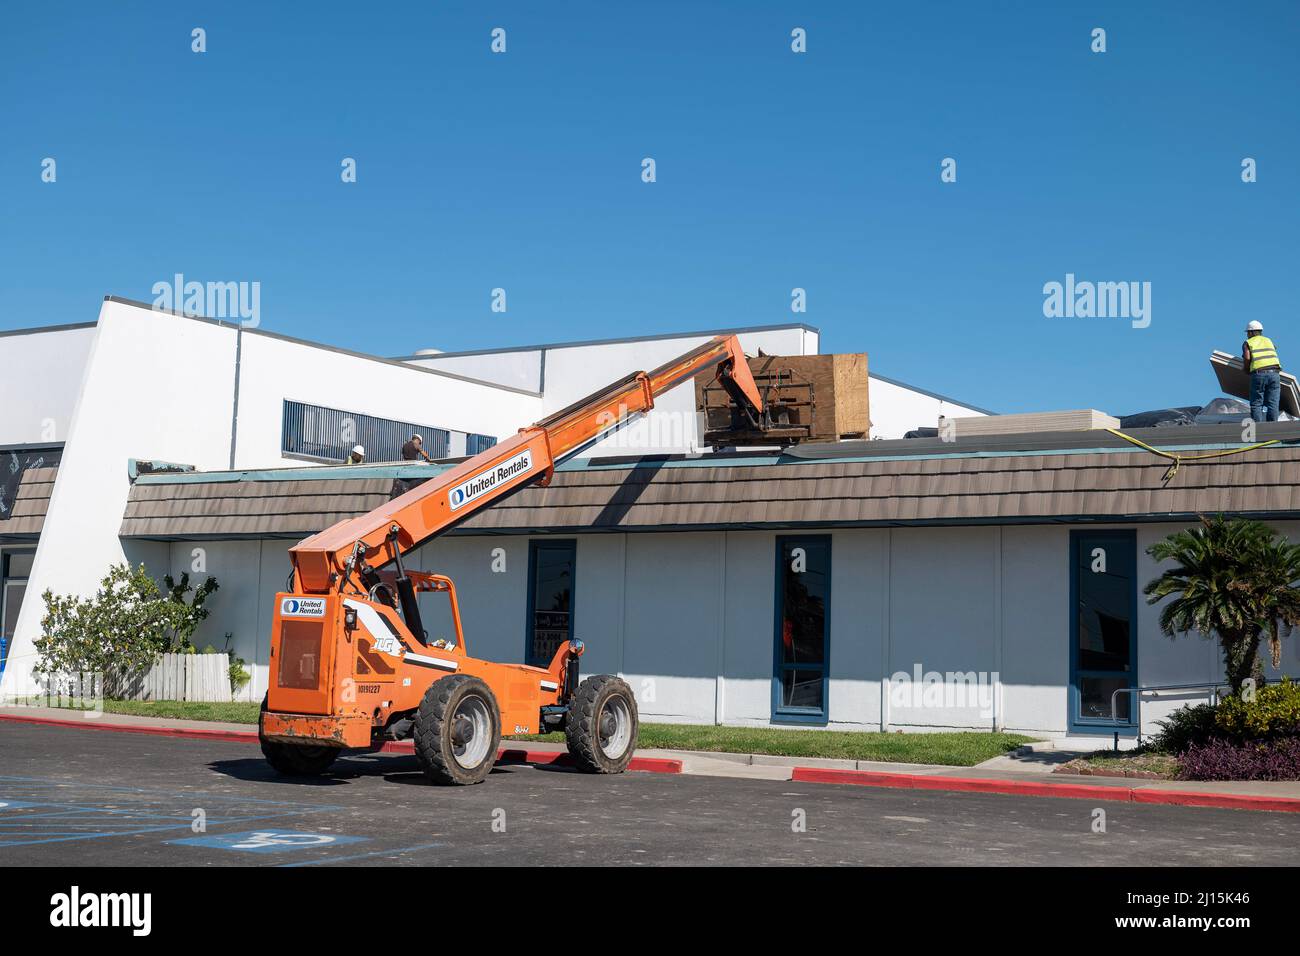 PORT ARANSAS, TX - 29 JAN 2020: Orange hydraulic forklift is used at a building where the roof is being repaired after damage from Hurricane Harvey. Stock Photo